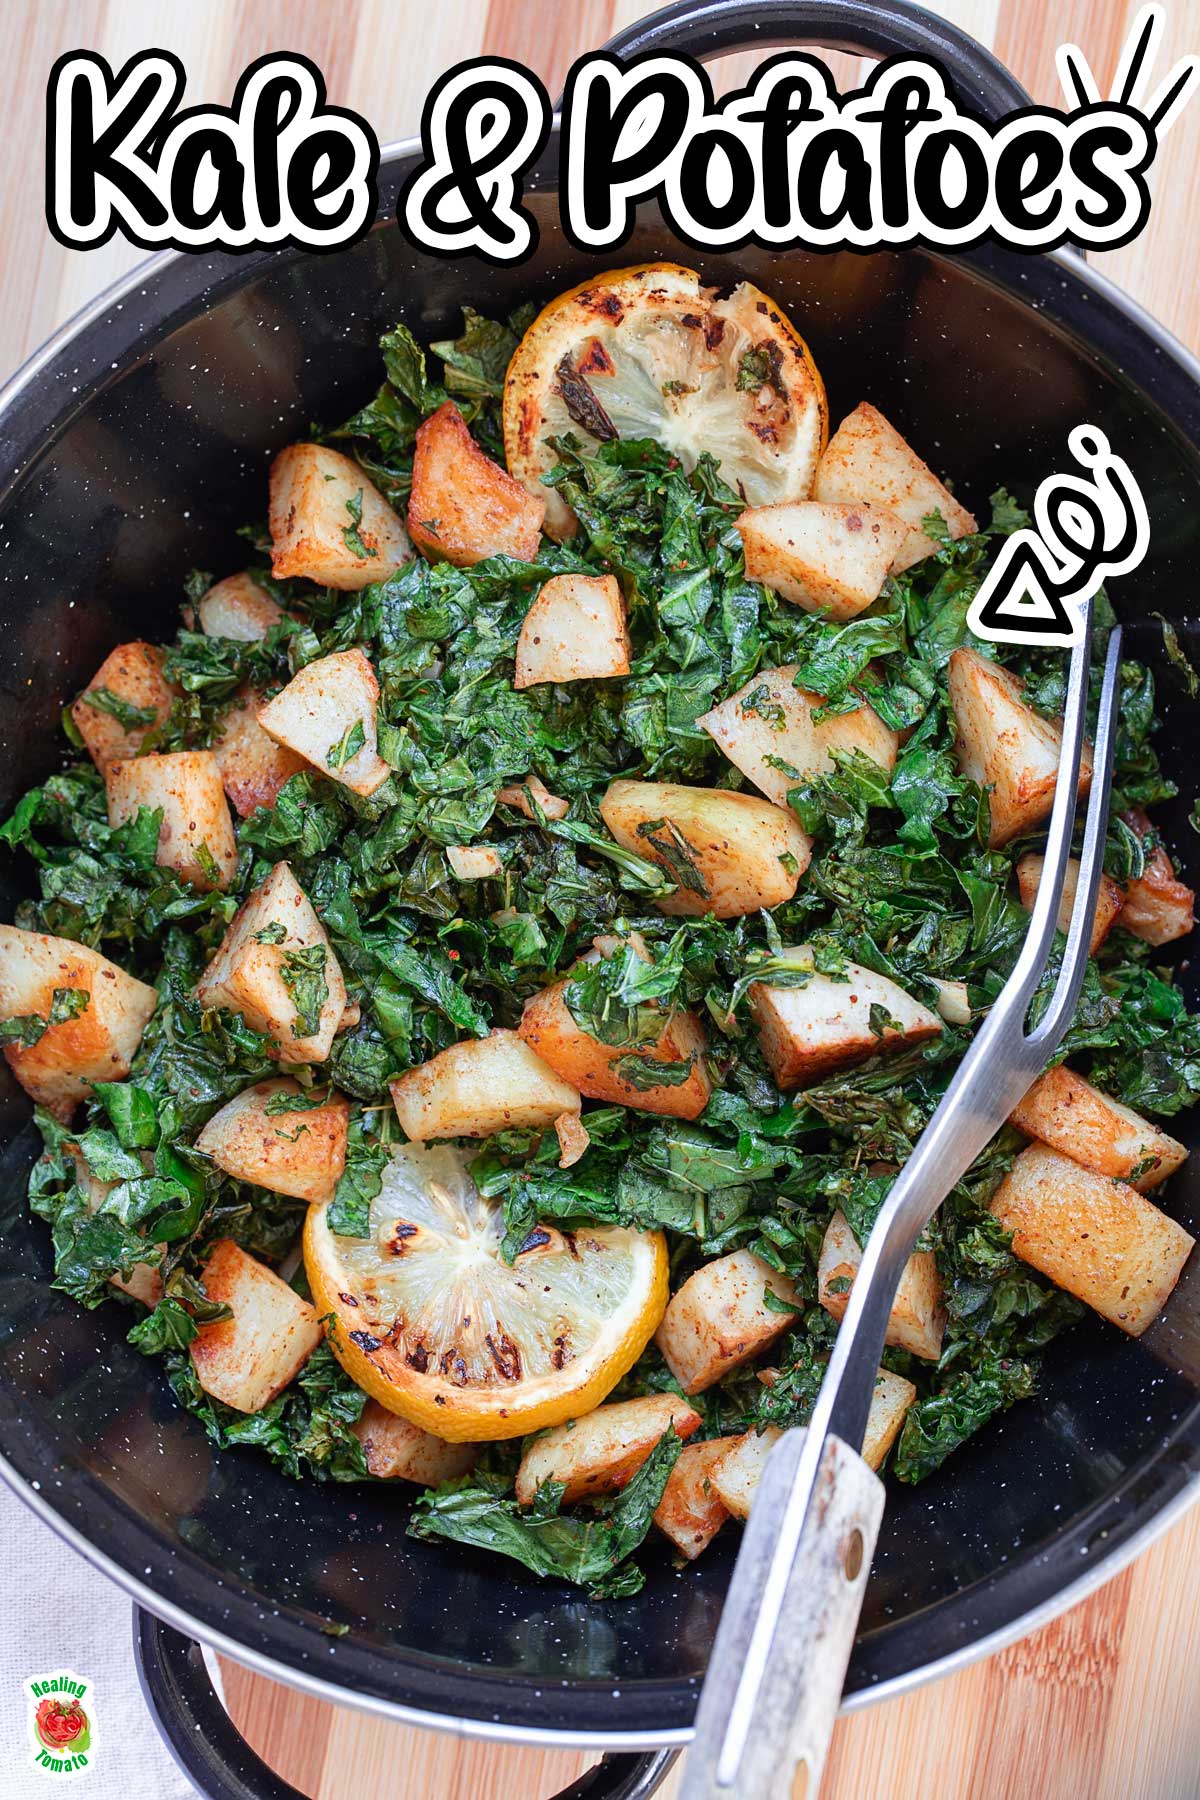 Top view of a black wok filled with sauteed kale and potatoes. Wok is on a brown chopping board